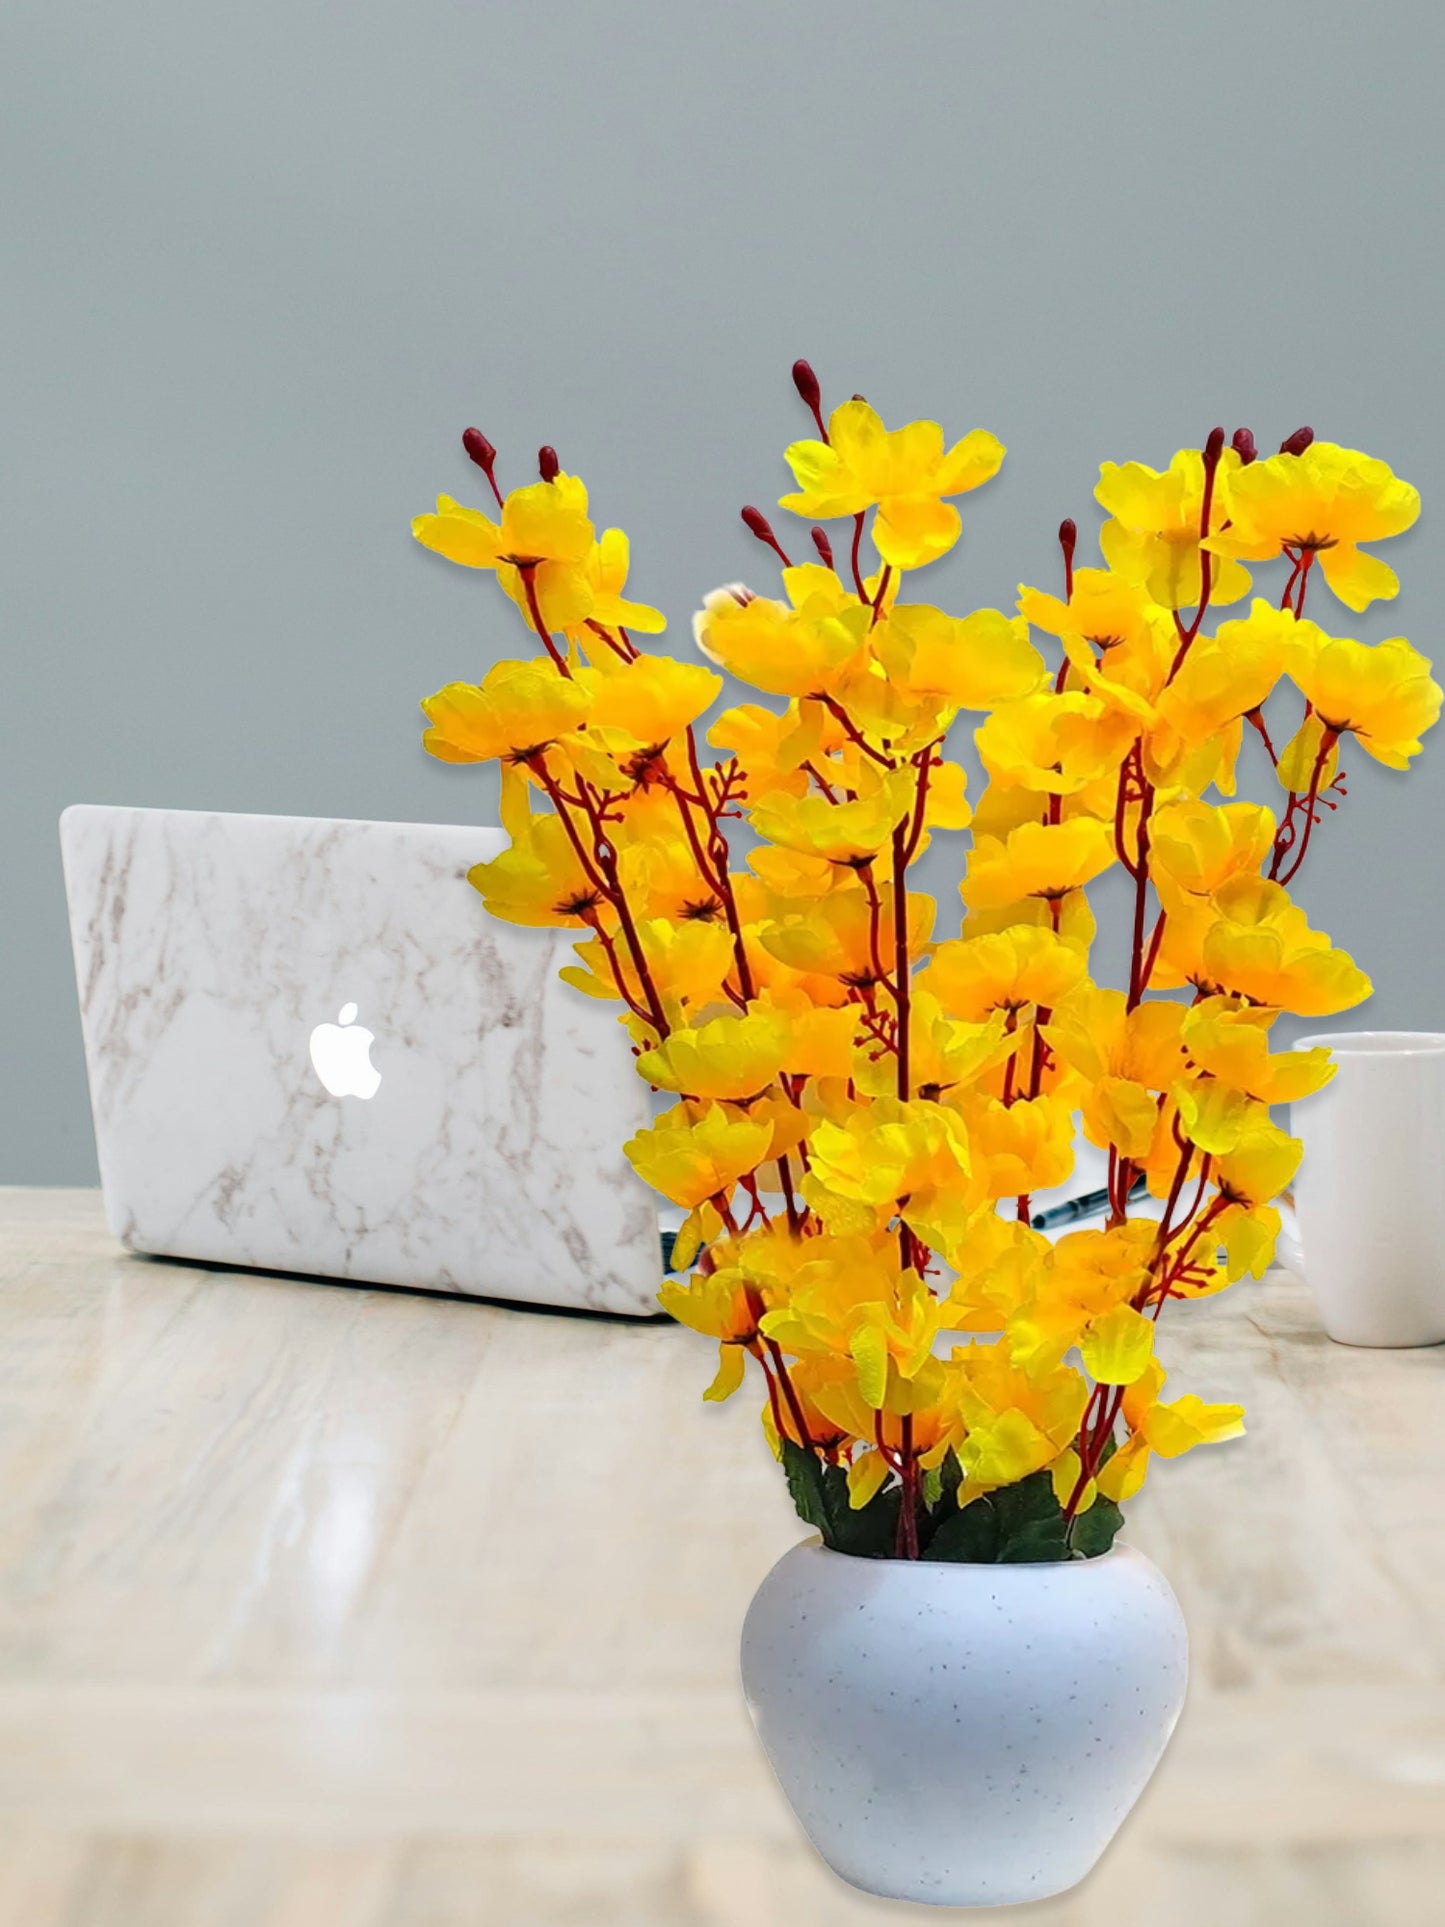 ARTSY® Artificial Flowers With Pot For Home Decoration, Office Decor Cherry Blossom combo, Yellow, 1 Piece